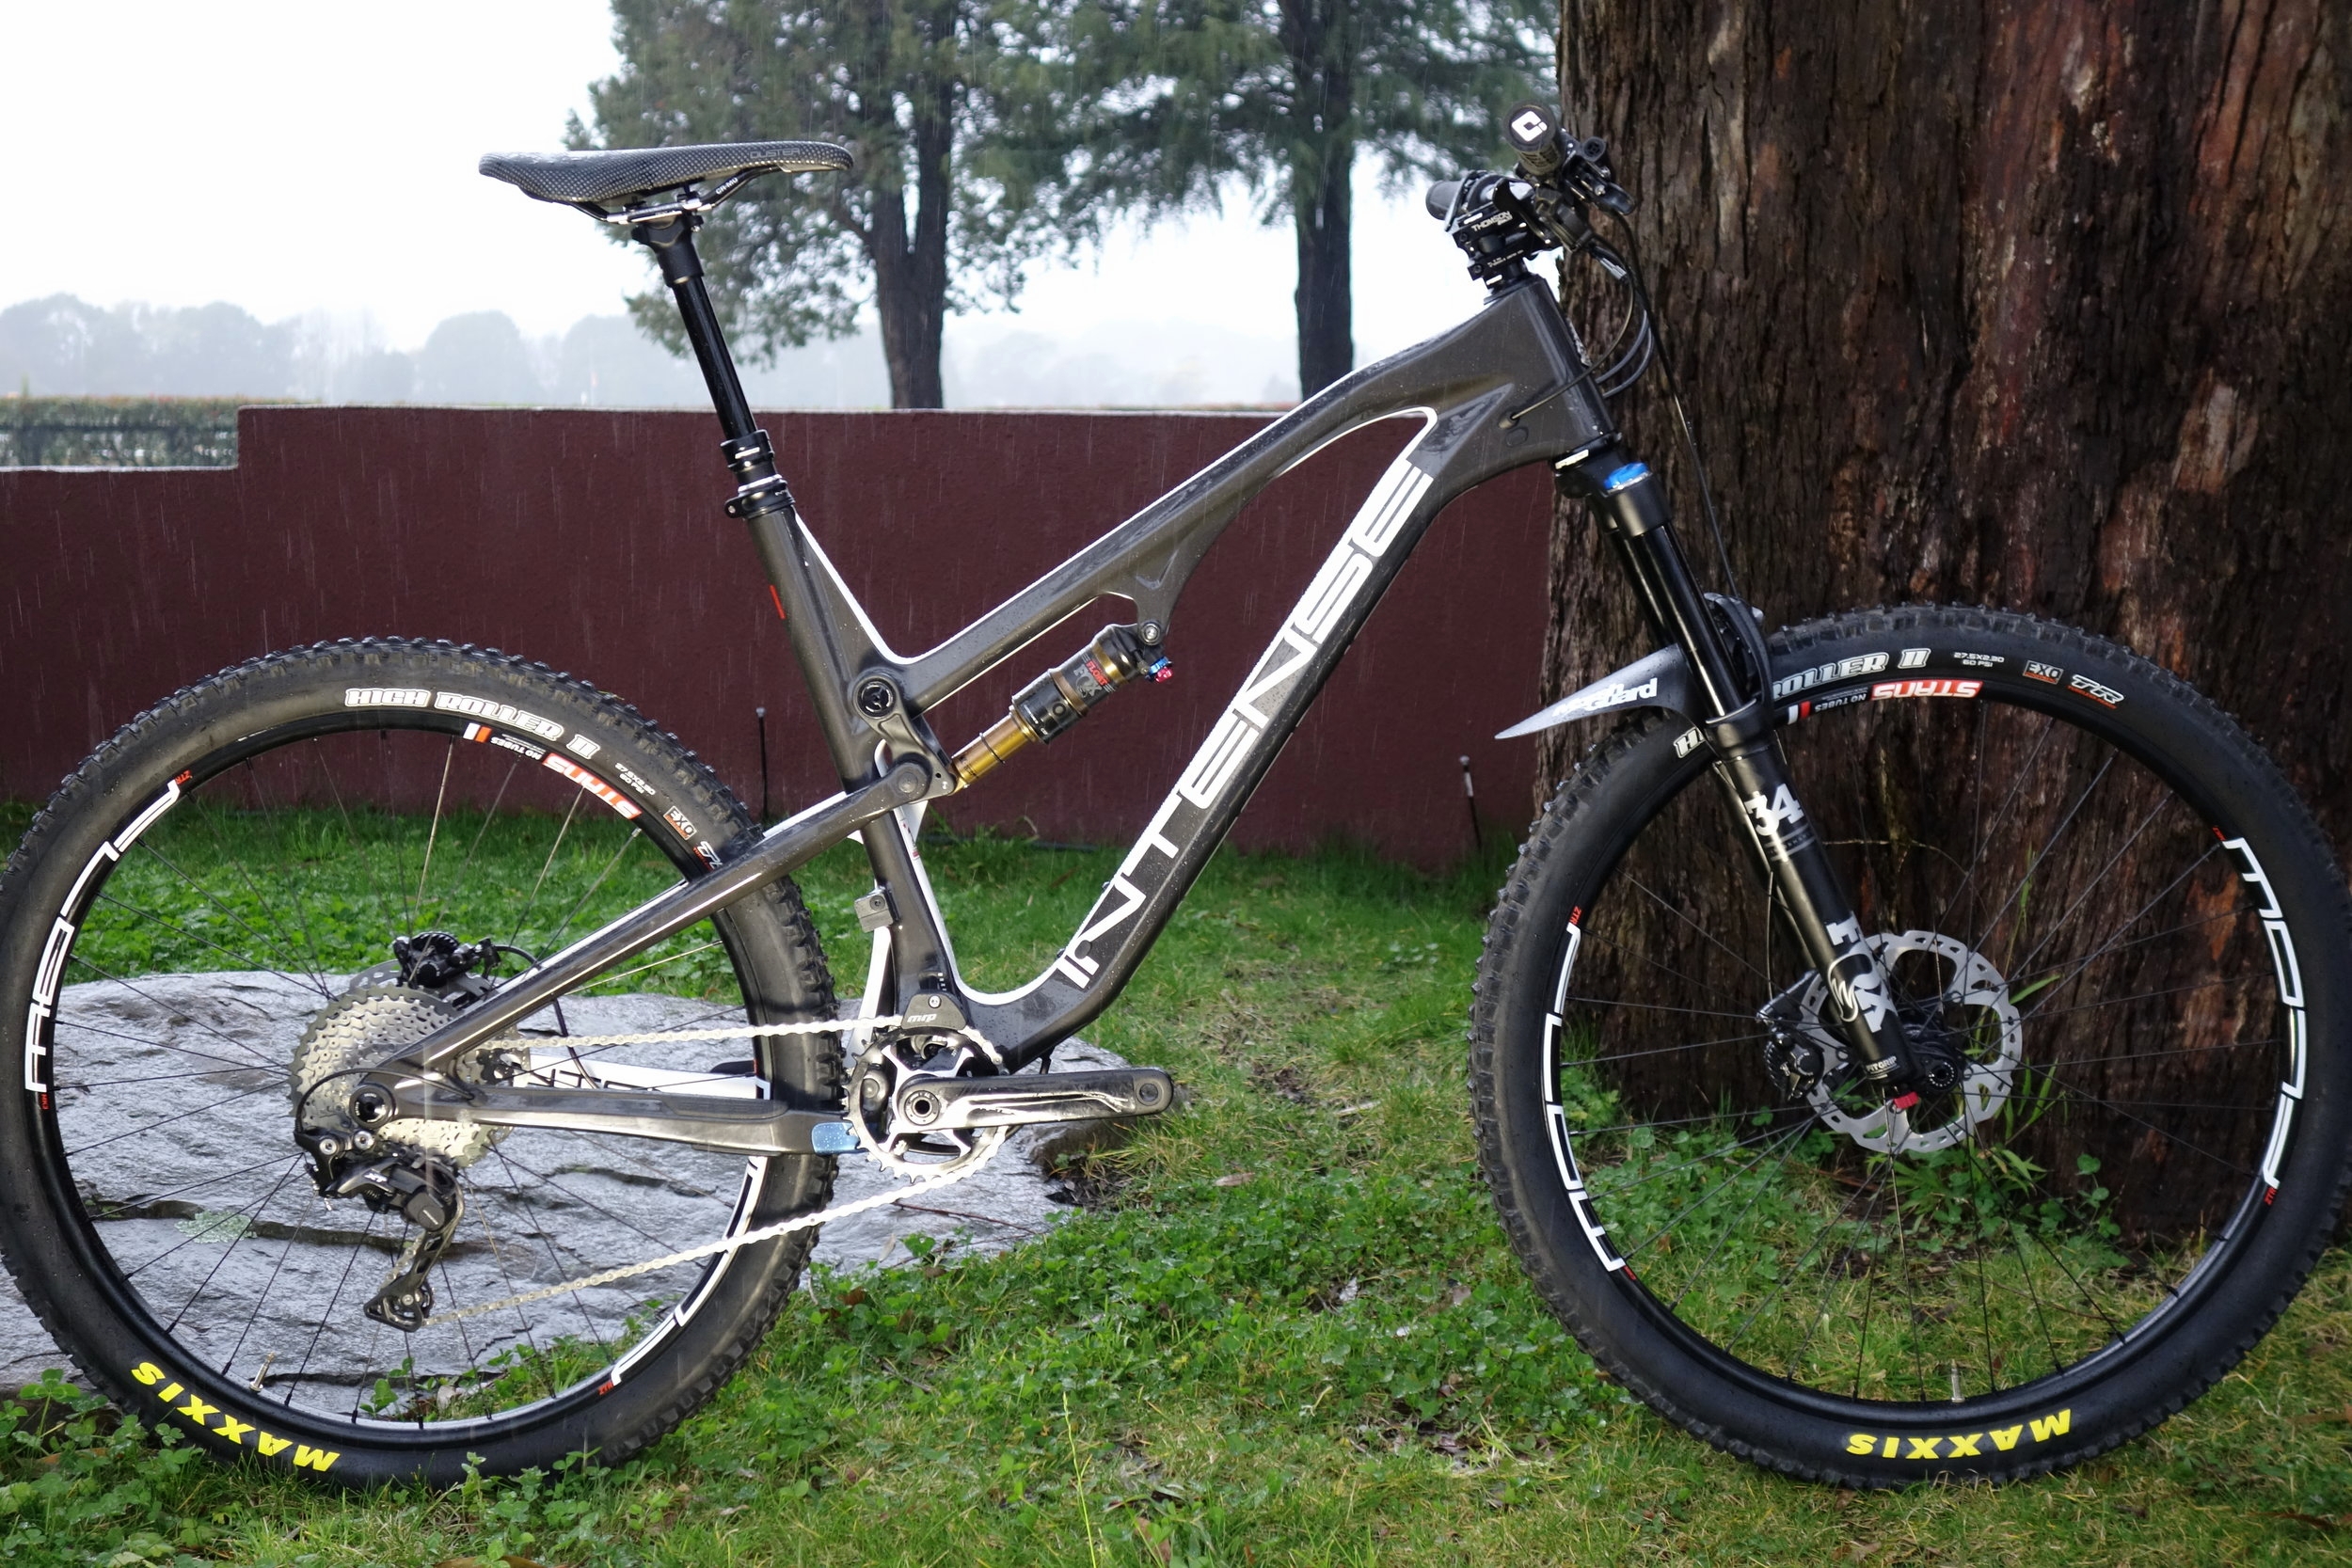 The Spider 275. 115-130mm XC/trail bike with a 67 degree headangle. And a super long reach of 467mm for this large